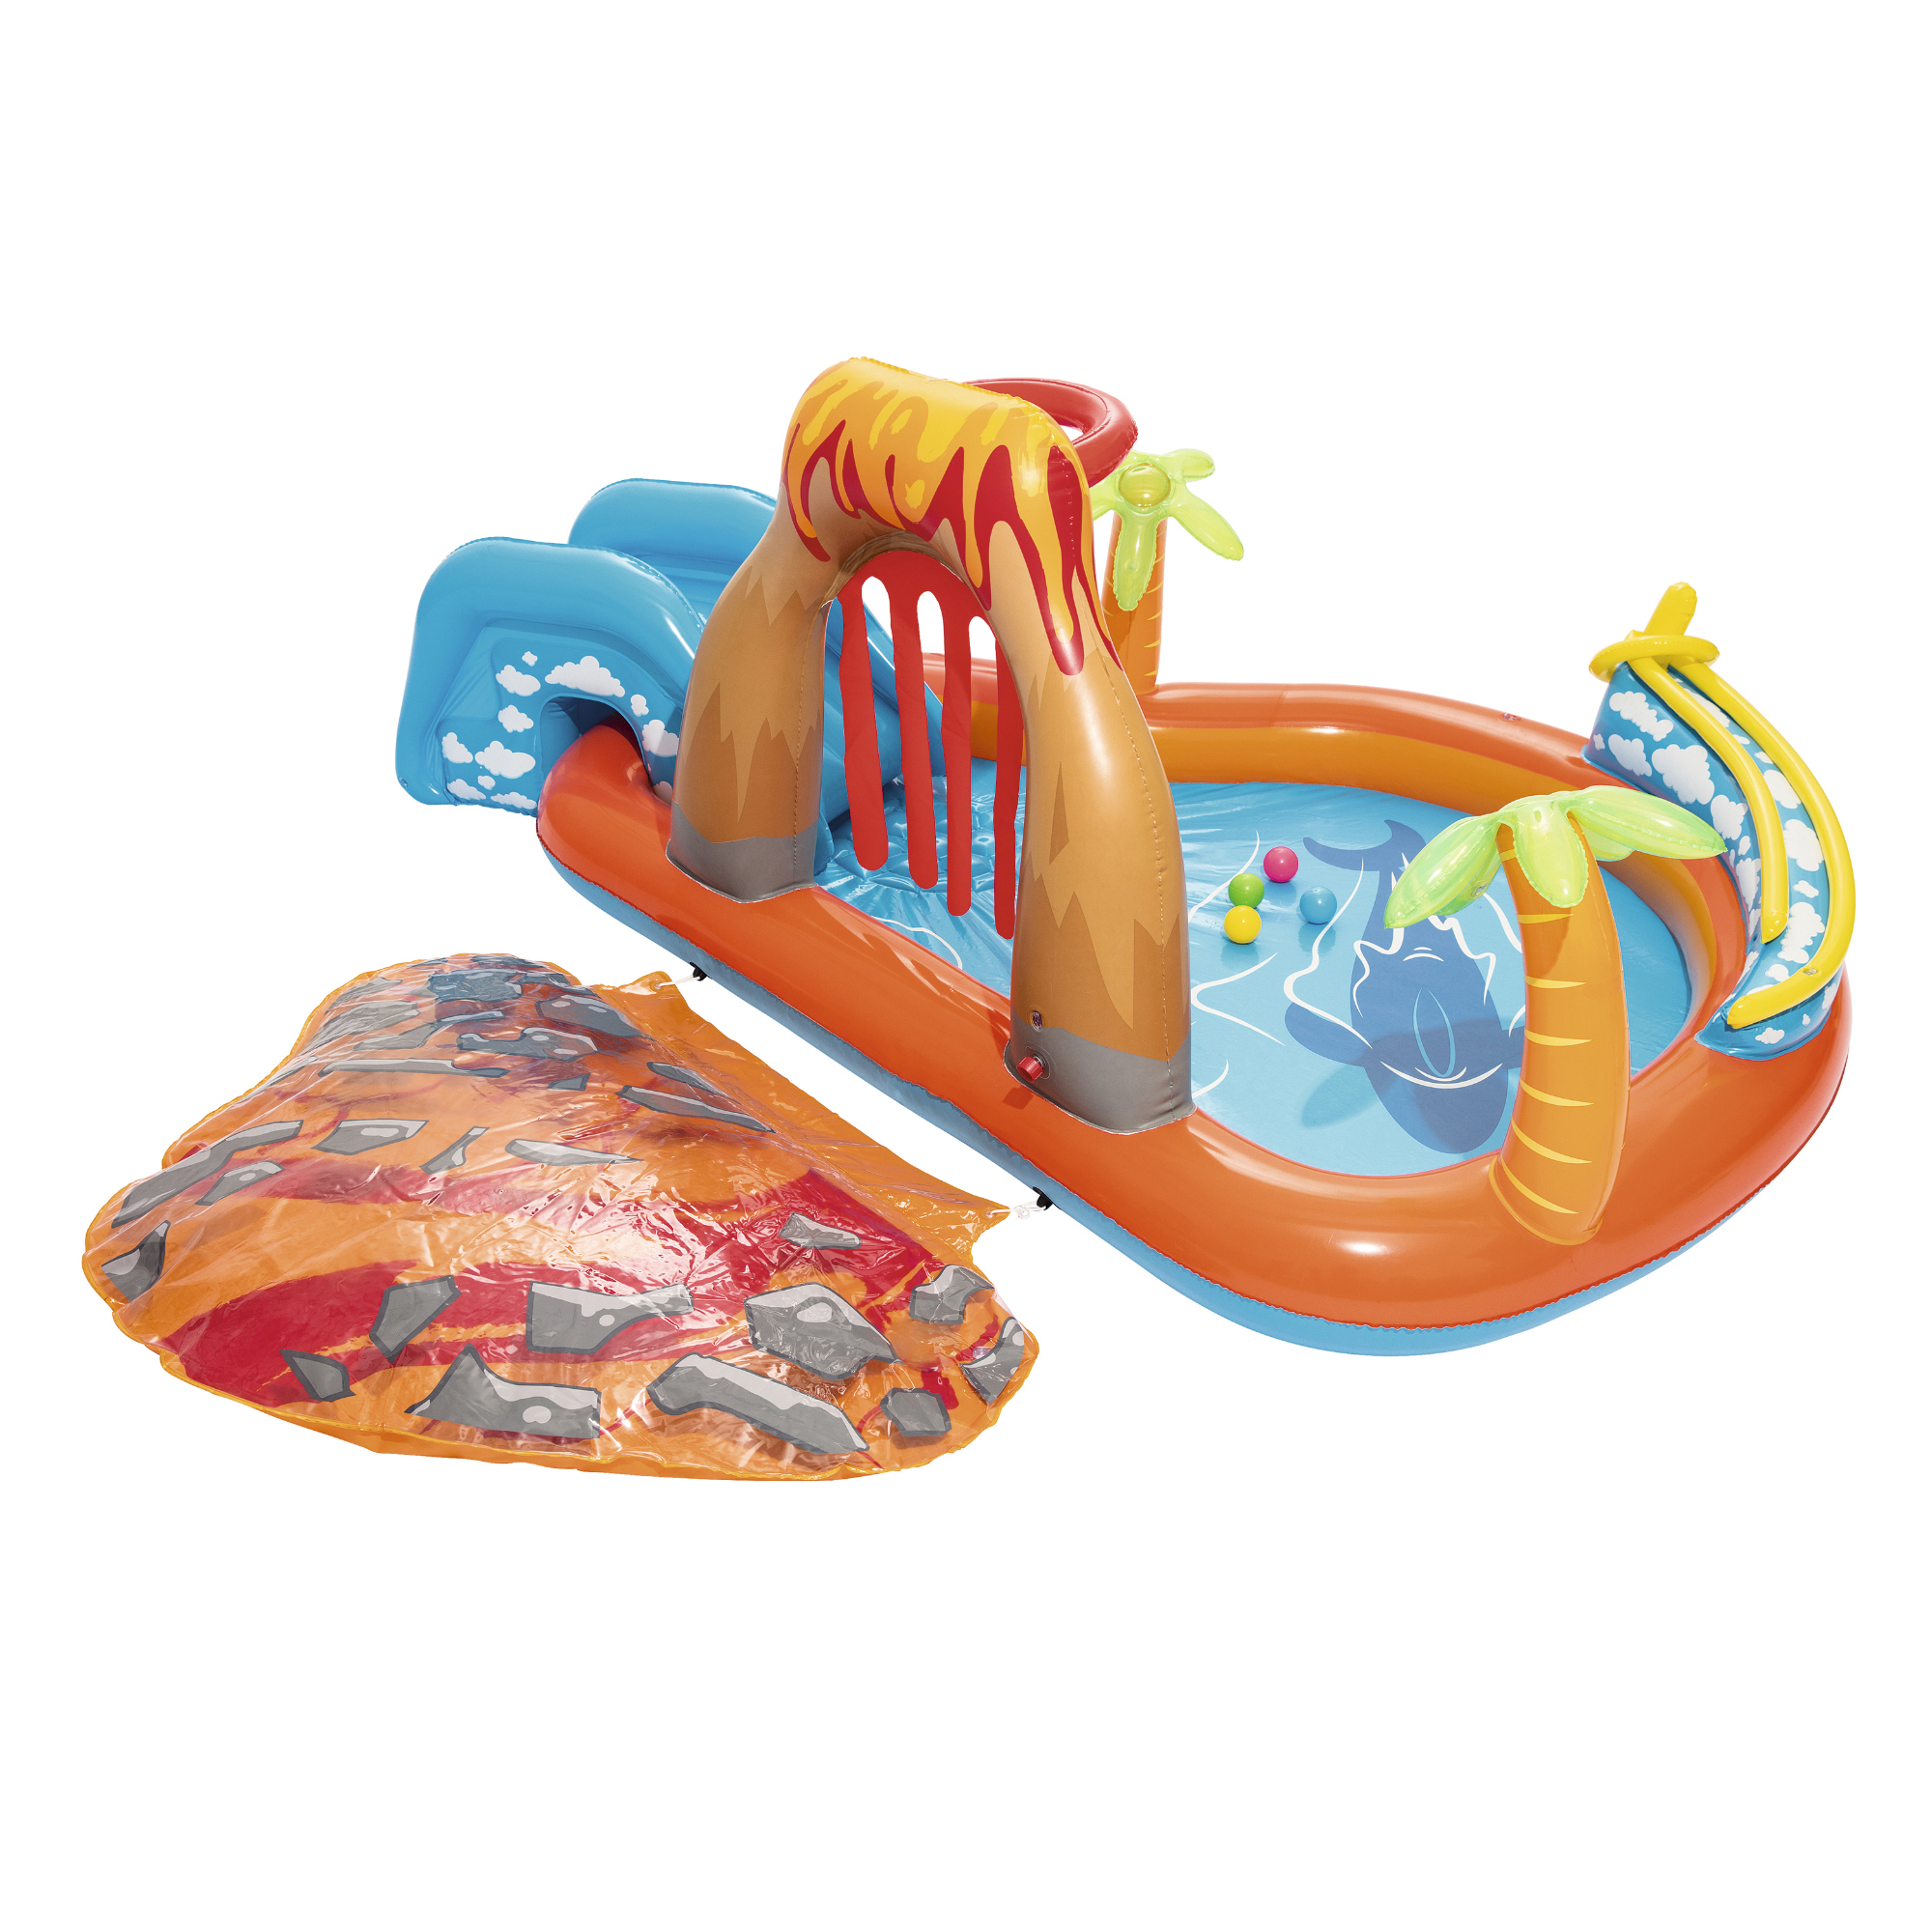 Bestway - H2OGO! 104 in. x 104 in. x 41 in. Lava Lagoon Play Center - image 8 of 8